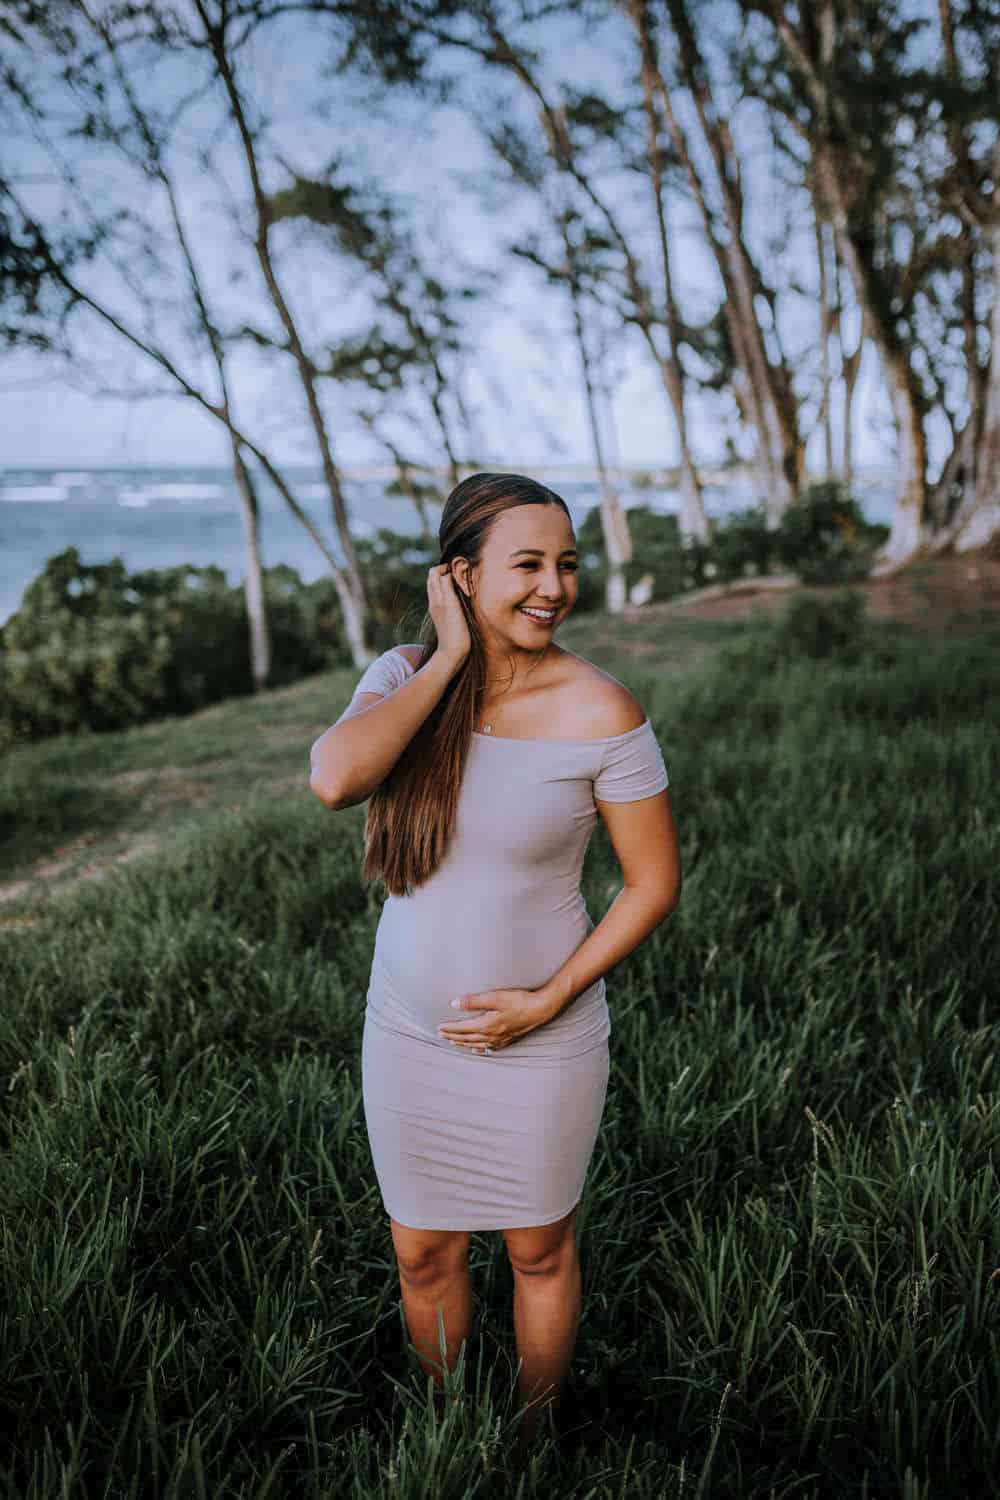 pregnancy update and maternity session outfit Inso by Anela Benavides